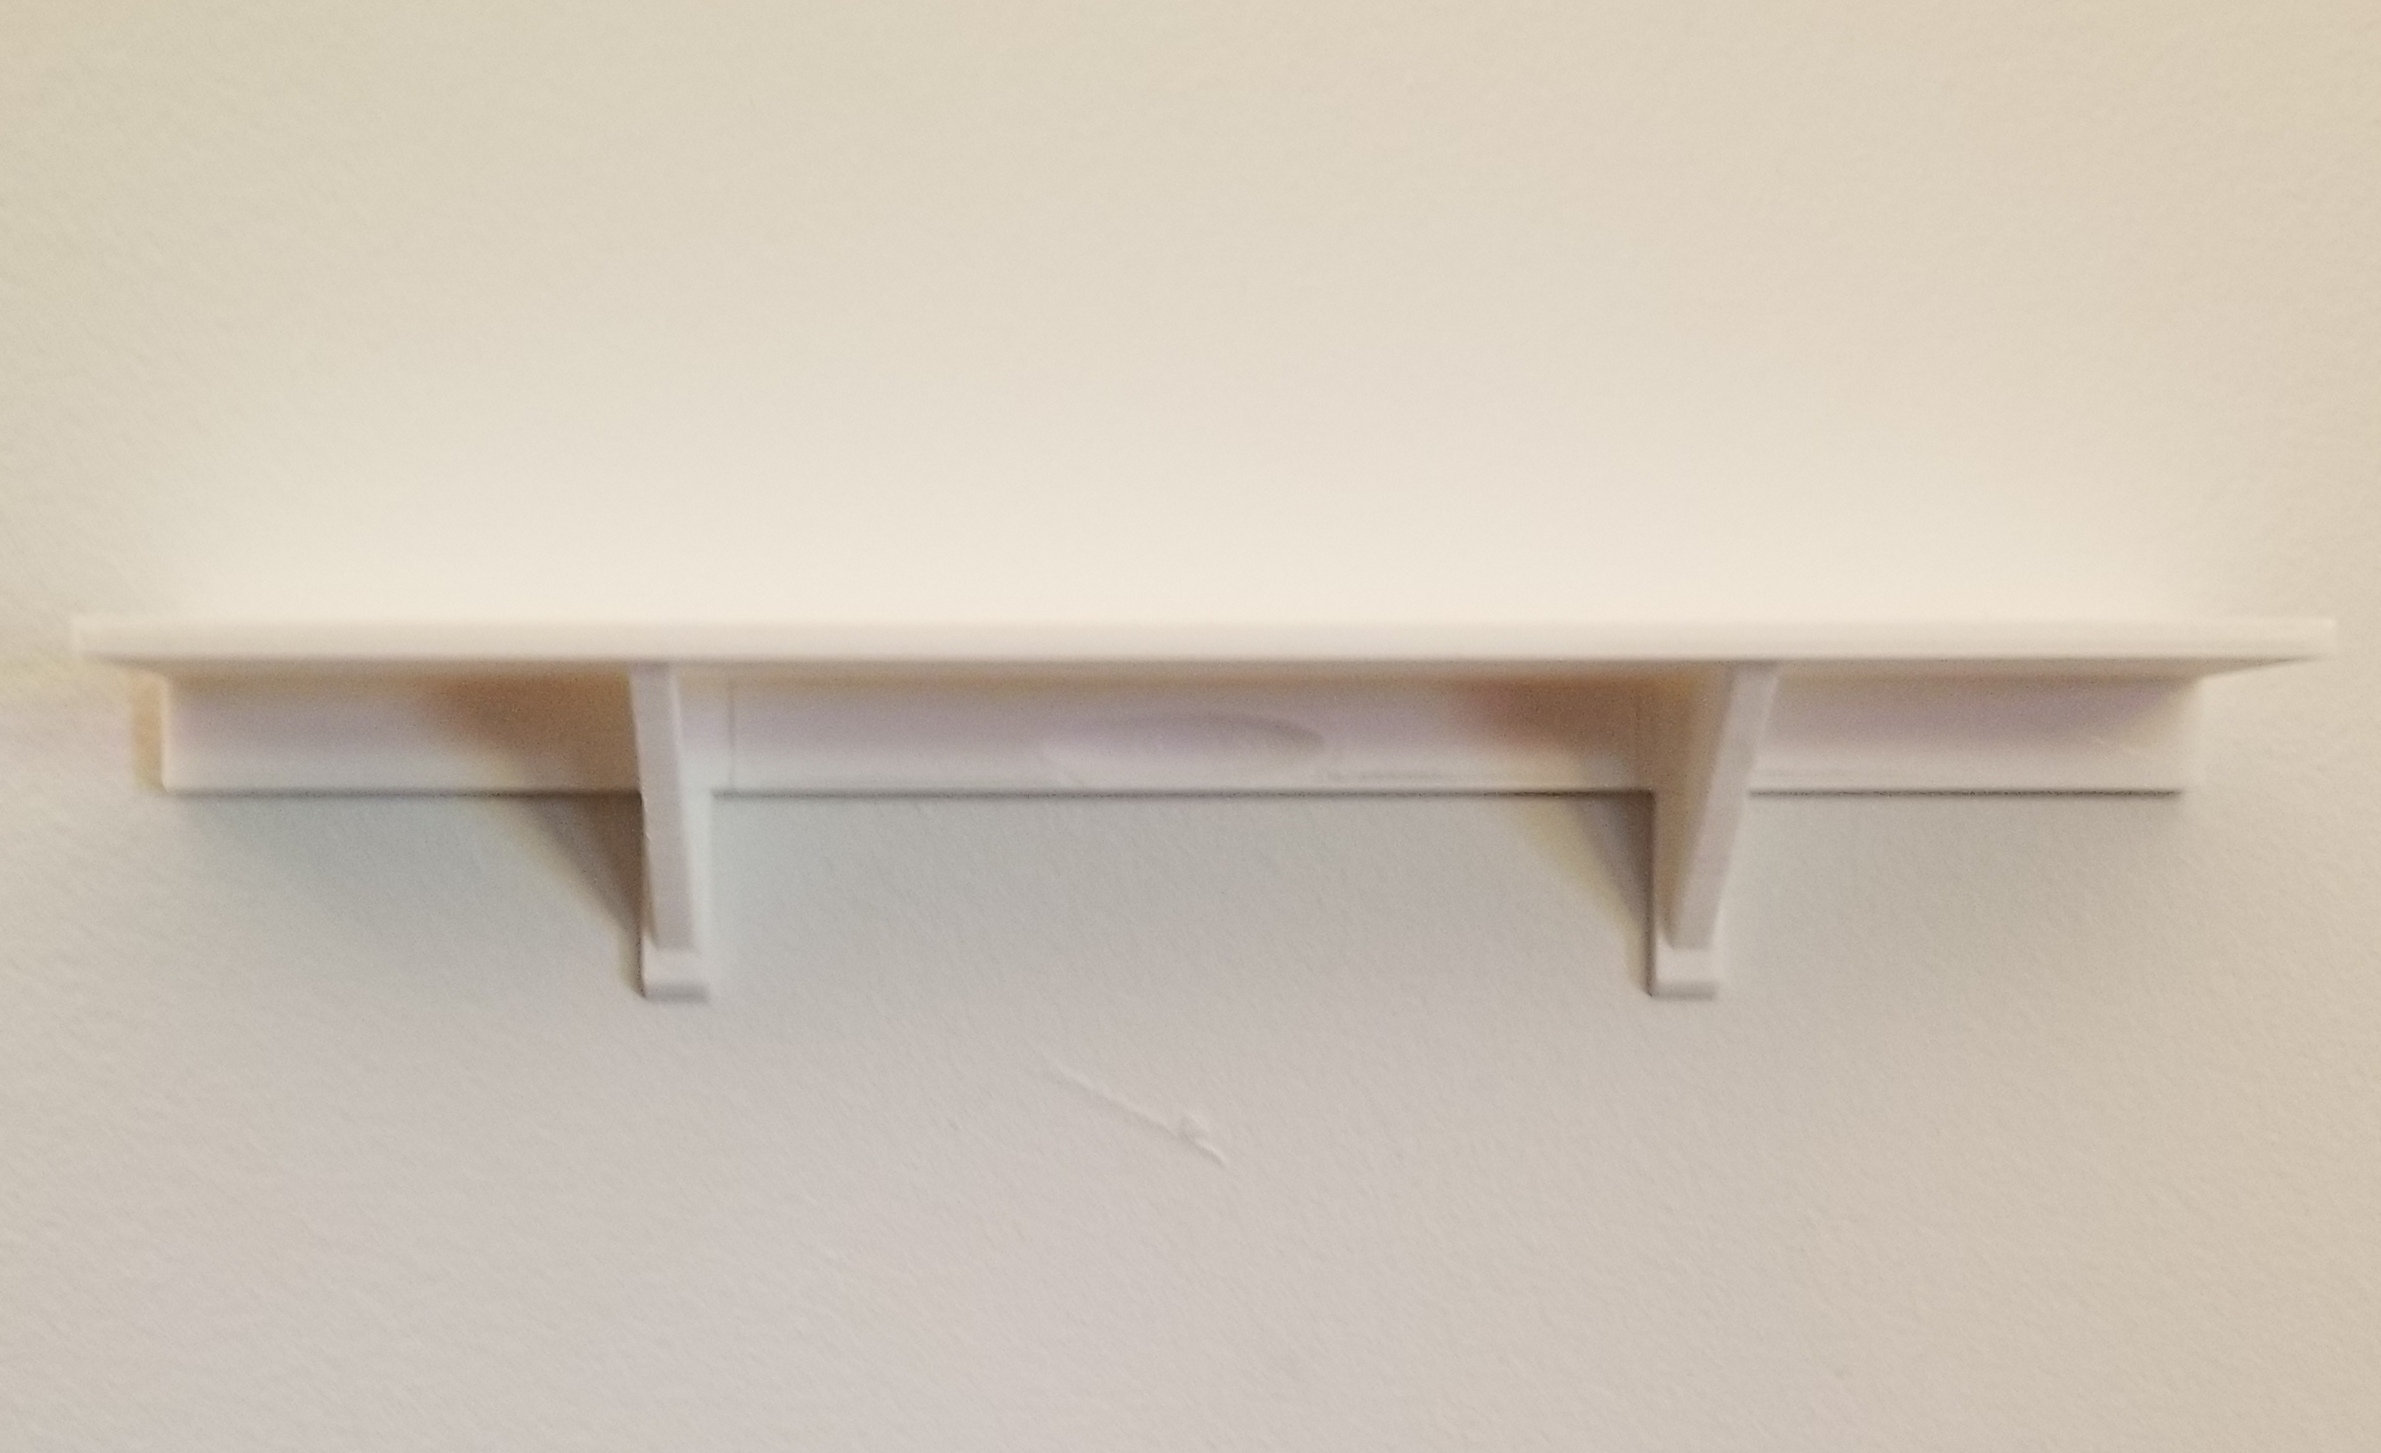 12 X 2 Inch White Wall Shelf Free Shipping Uses 3M Command Strips for Easy  Mounting and Damage Free Removal No Nails or Screws Required 